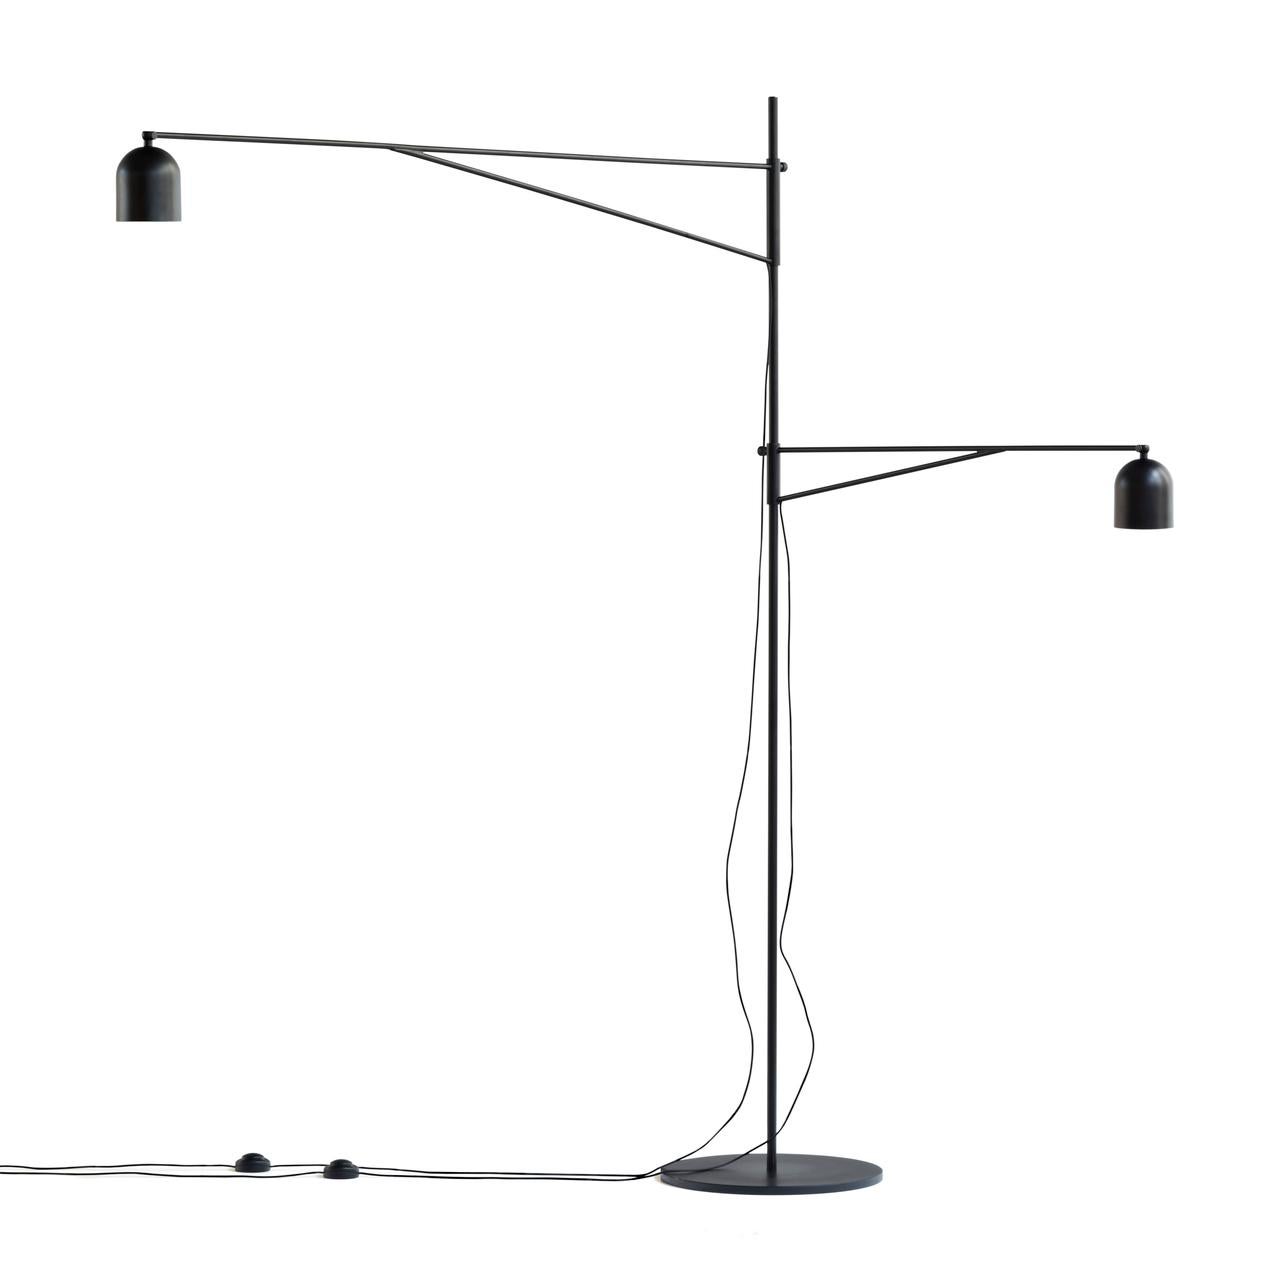 Floor lamp designed by Anatomy Design in 2012. 

Quirky and slightly off, Awkward is a floor lamp with a deliberately peculiar anatomy - its long, slender arms reaching to illuminate two areas in close proximity: two sides of a sofa or both an